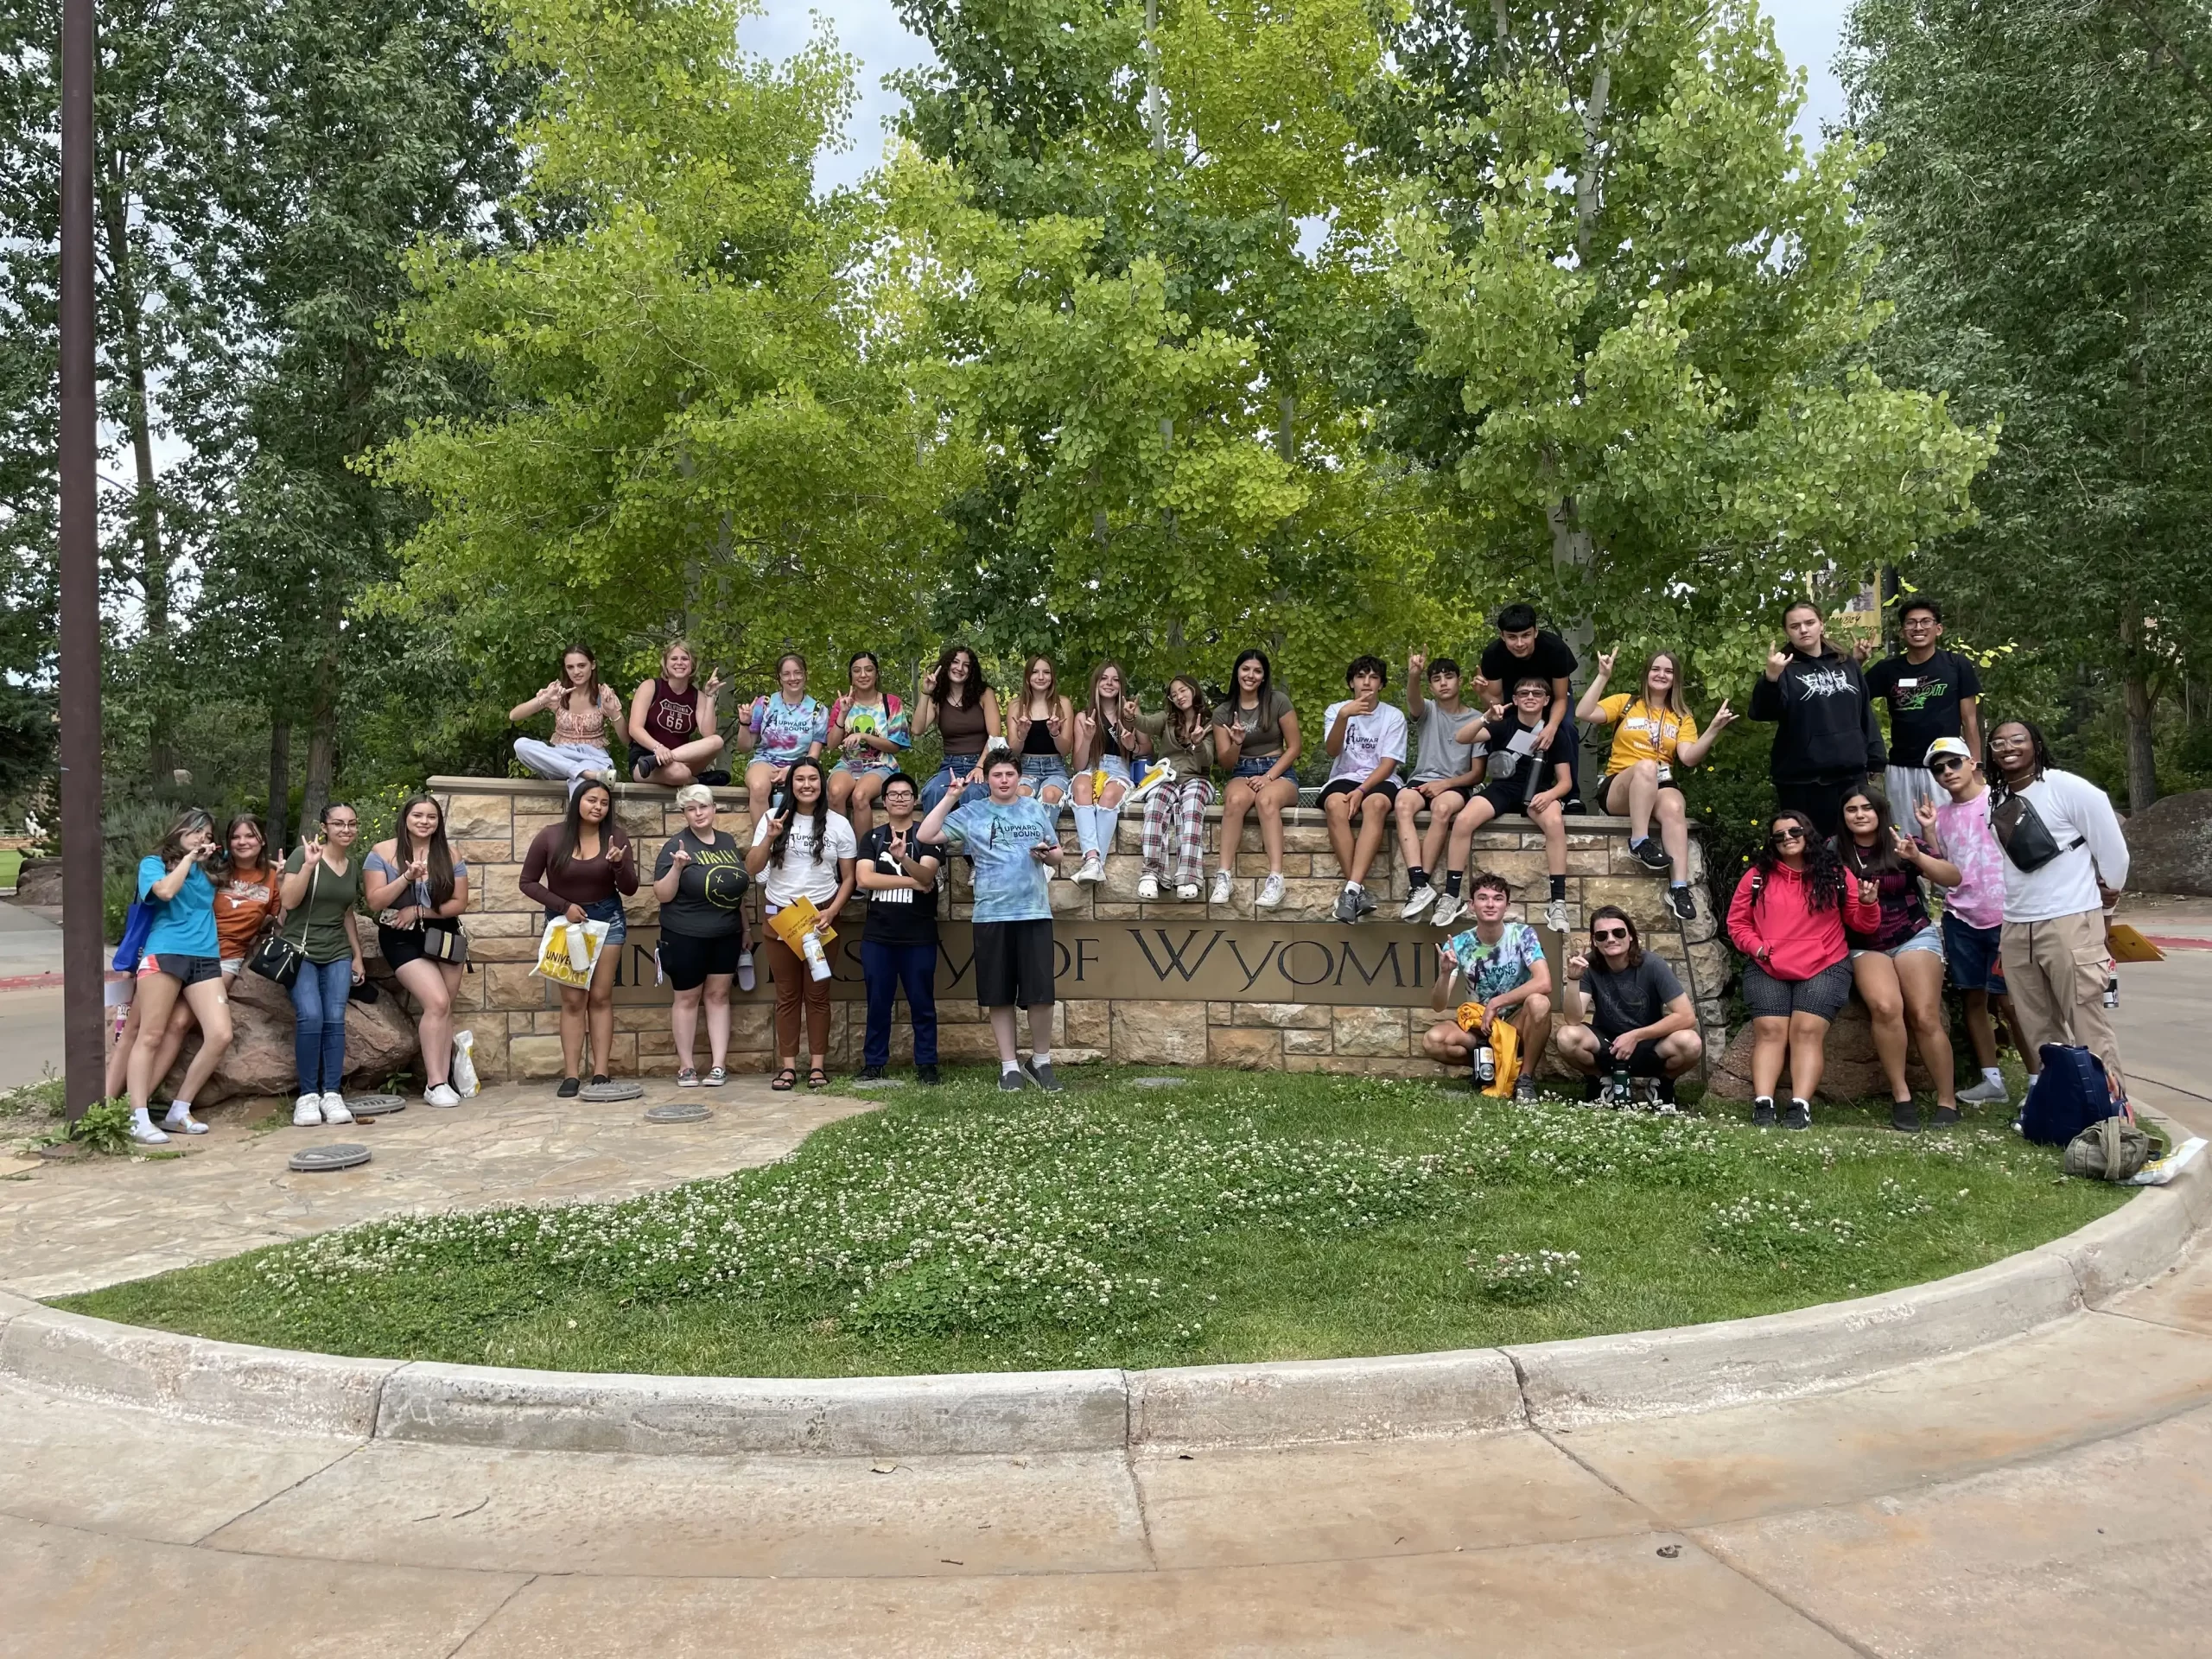 Upward Bound students enjoying the summer at the University of Wyoming. They got to meet new people, make new friends, and new memories.